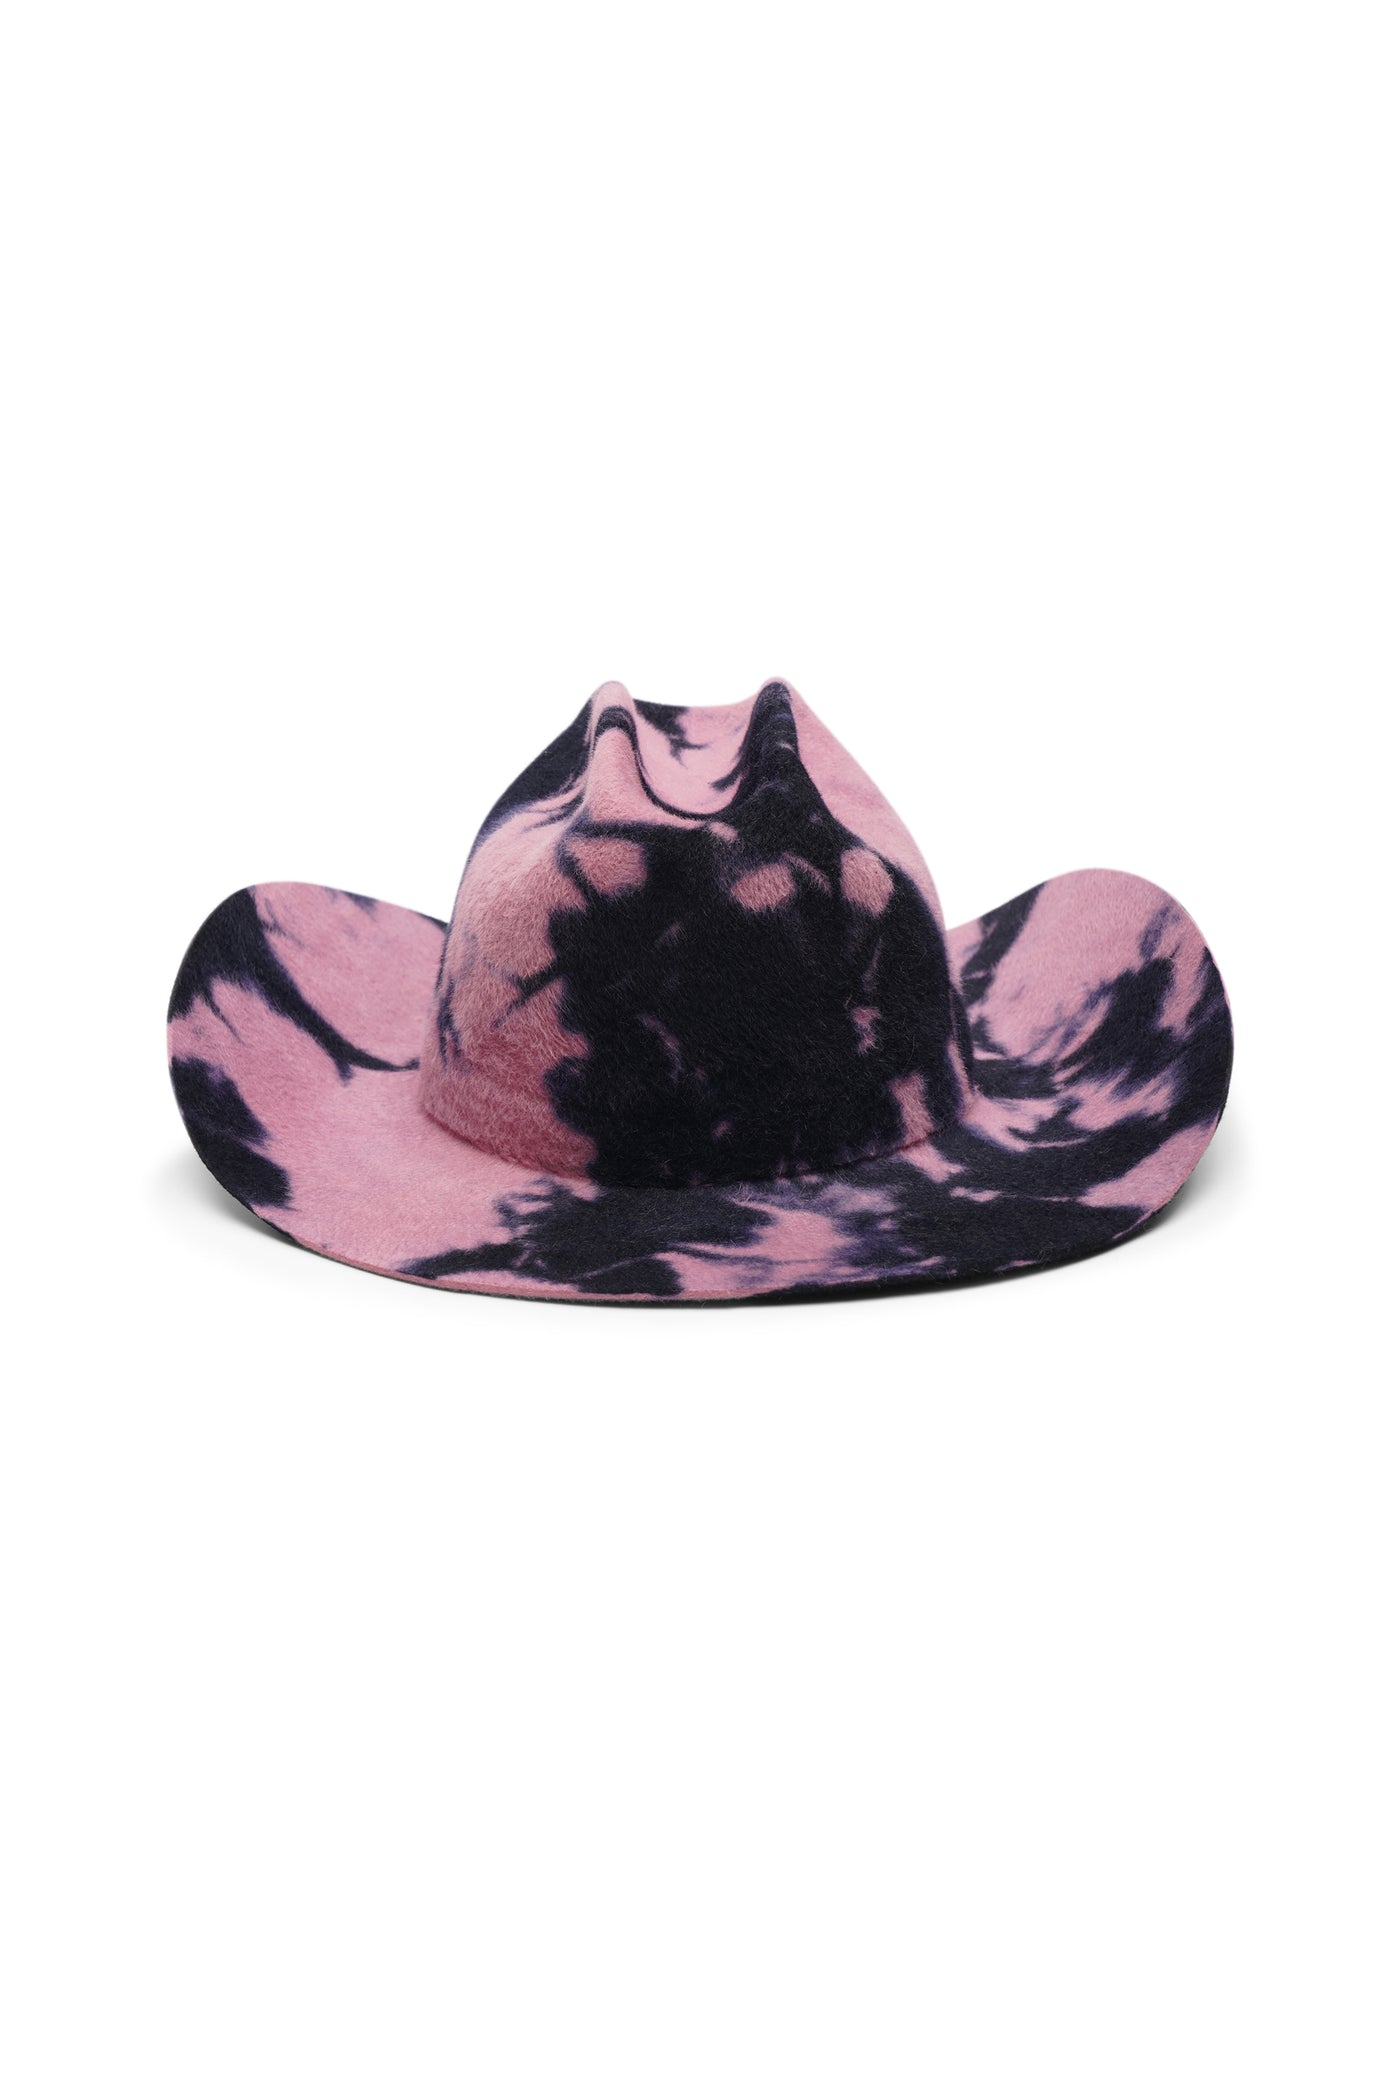 Pink/blue tie dye cowboy in 100% velour fur felt hat with a wide brim and center crease. Unisex hat style in various sizes and colors. We ship worldwide. Shop now. Each SoonNoon hat is handmade with unique character in Stockholm, Sweden.